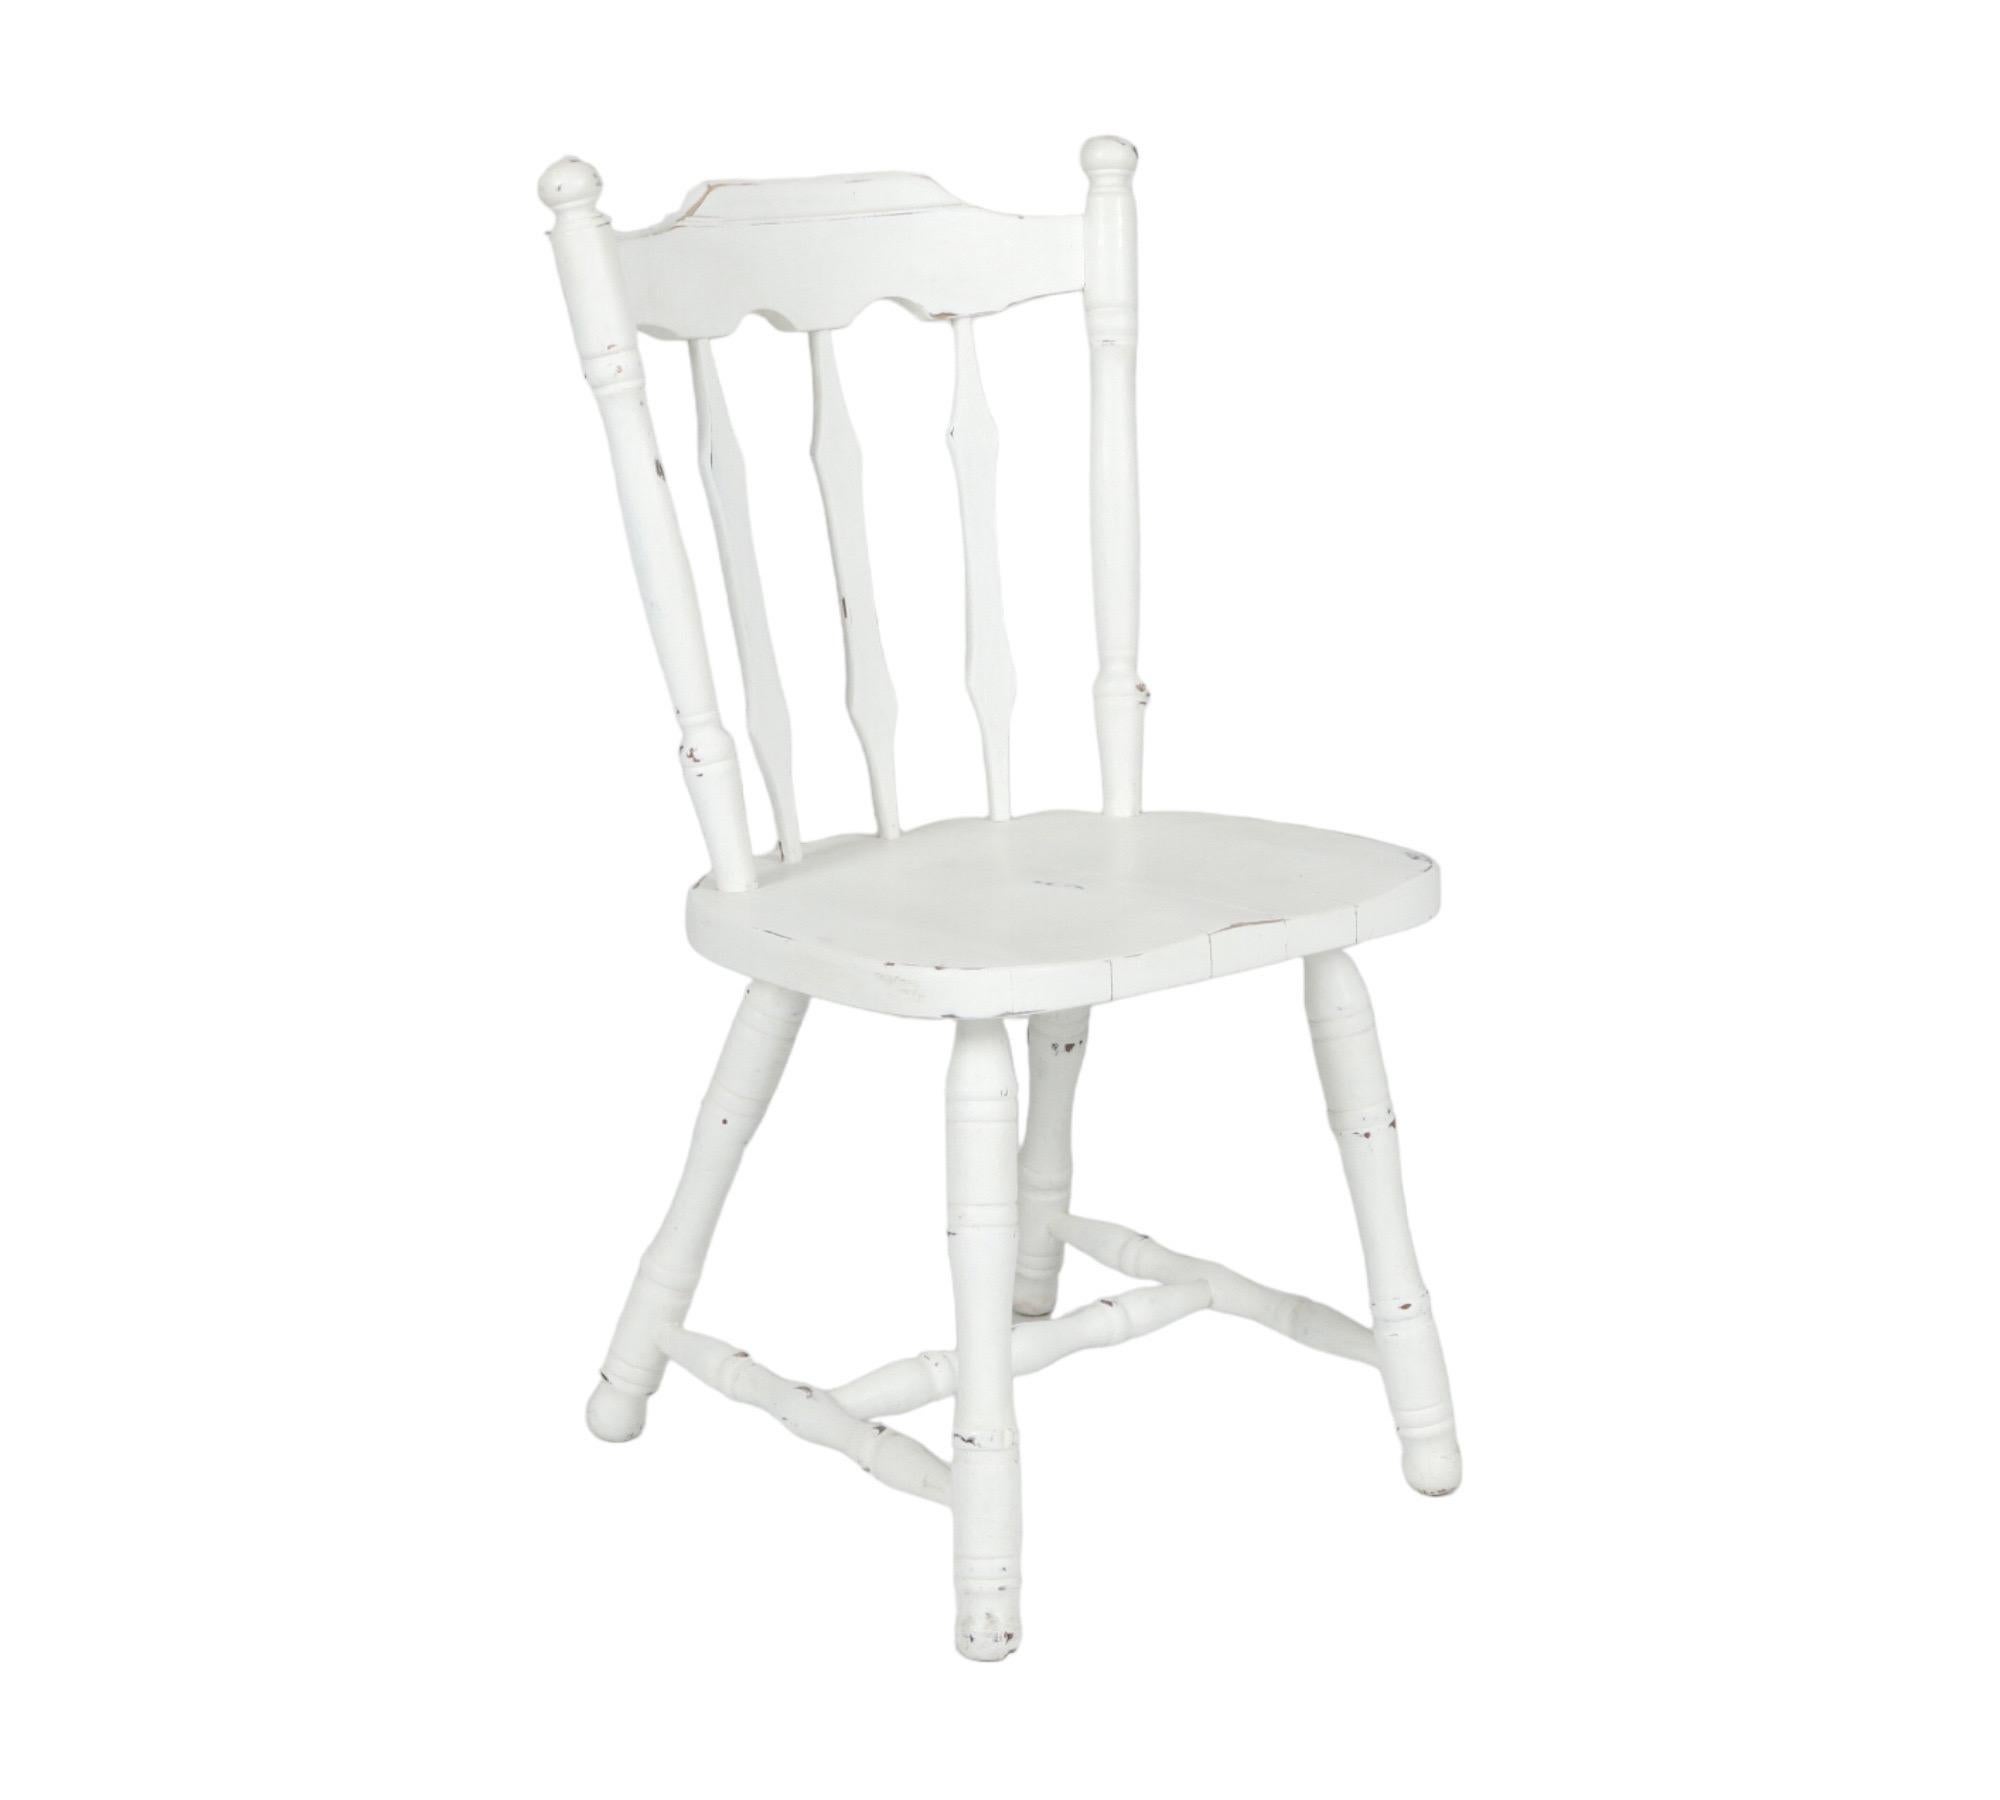 Rustic White Farmhouse Table with Four Chairs For Sale